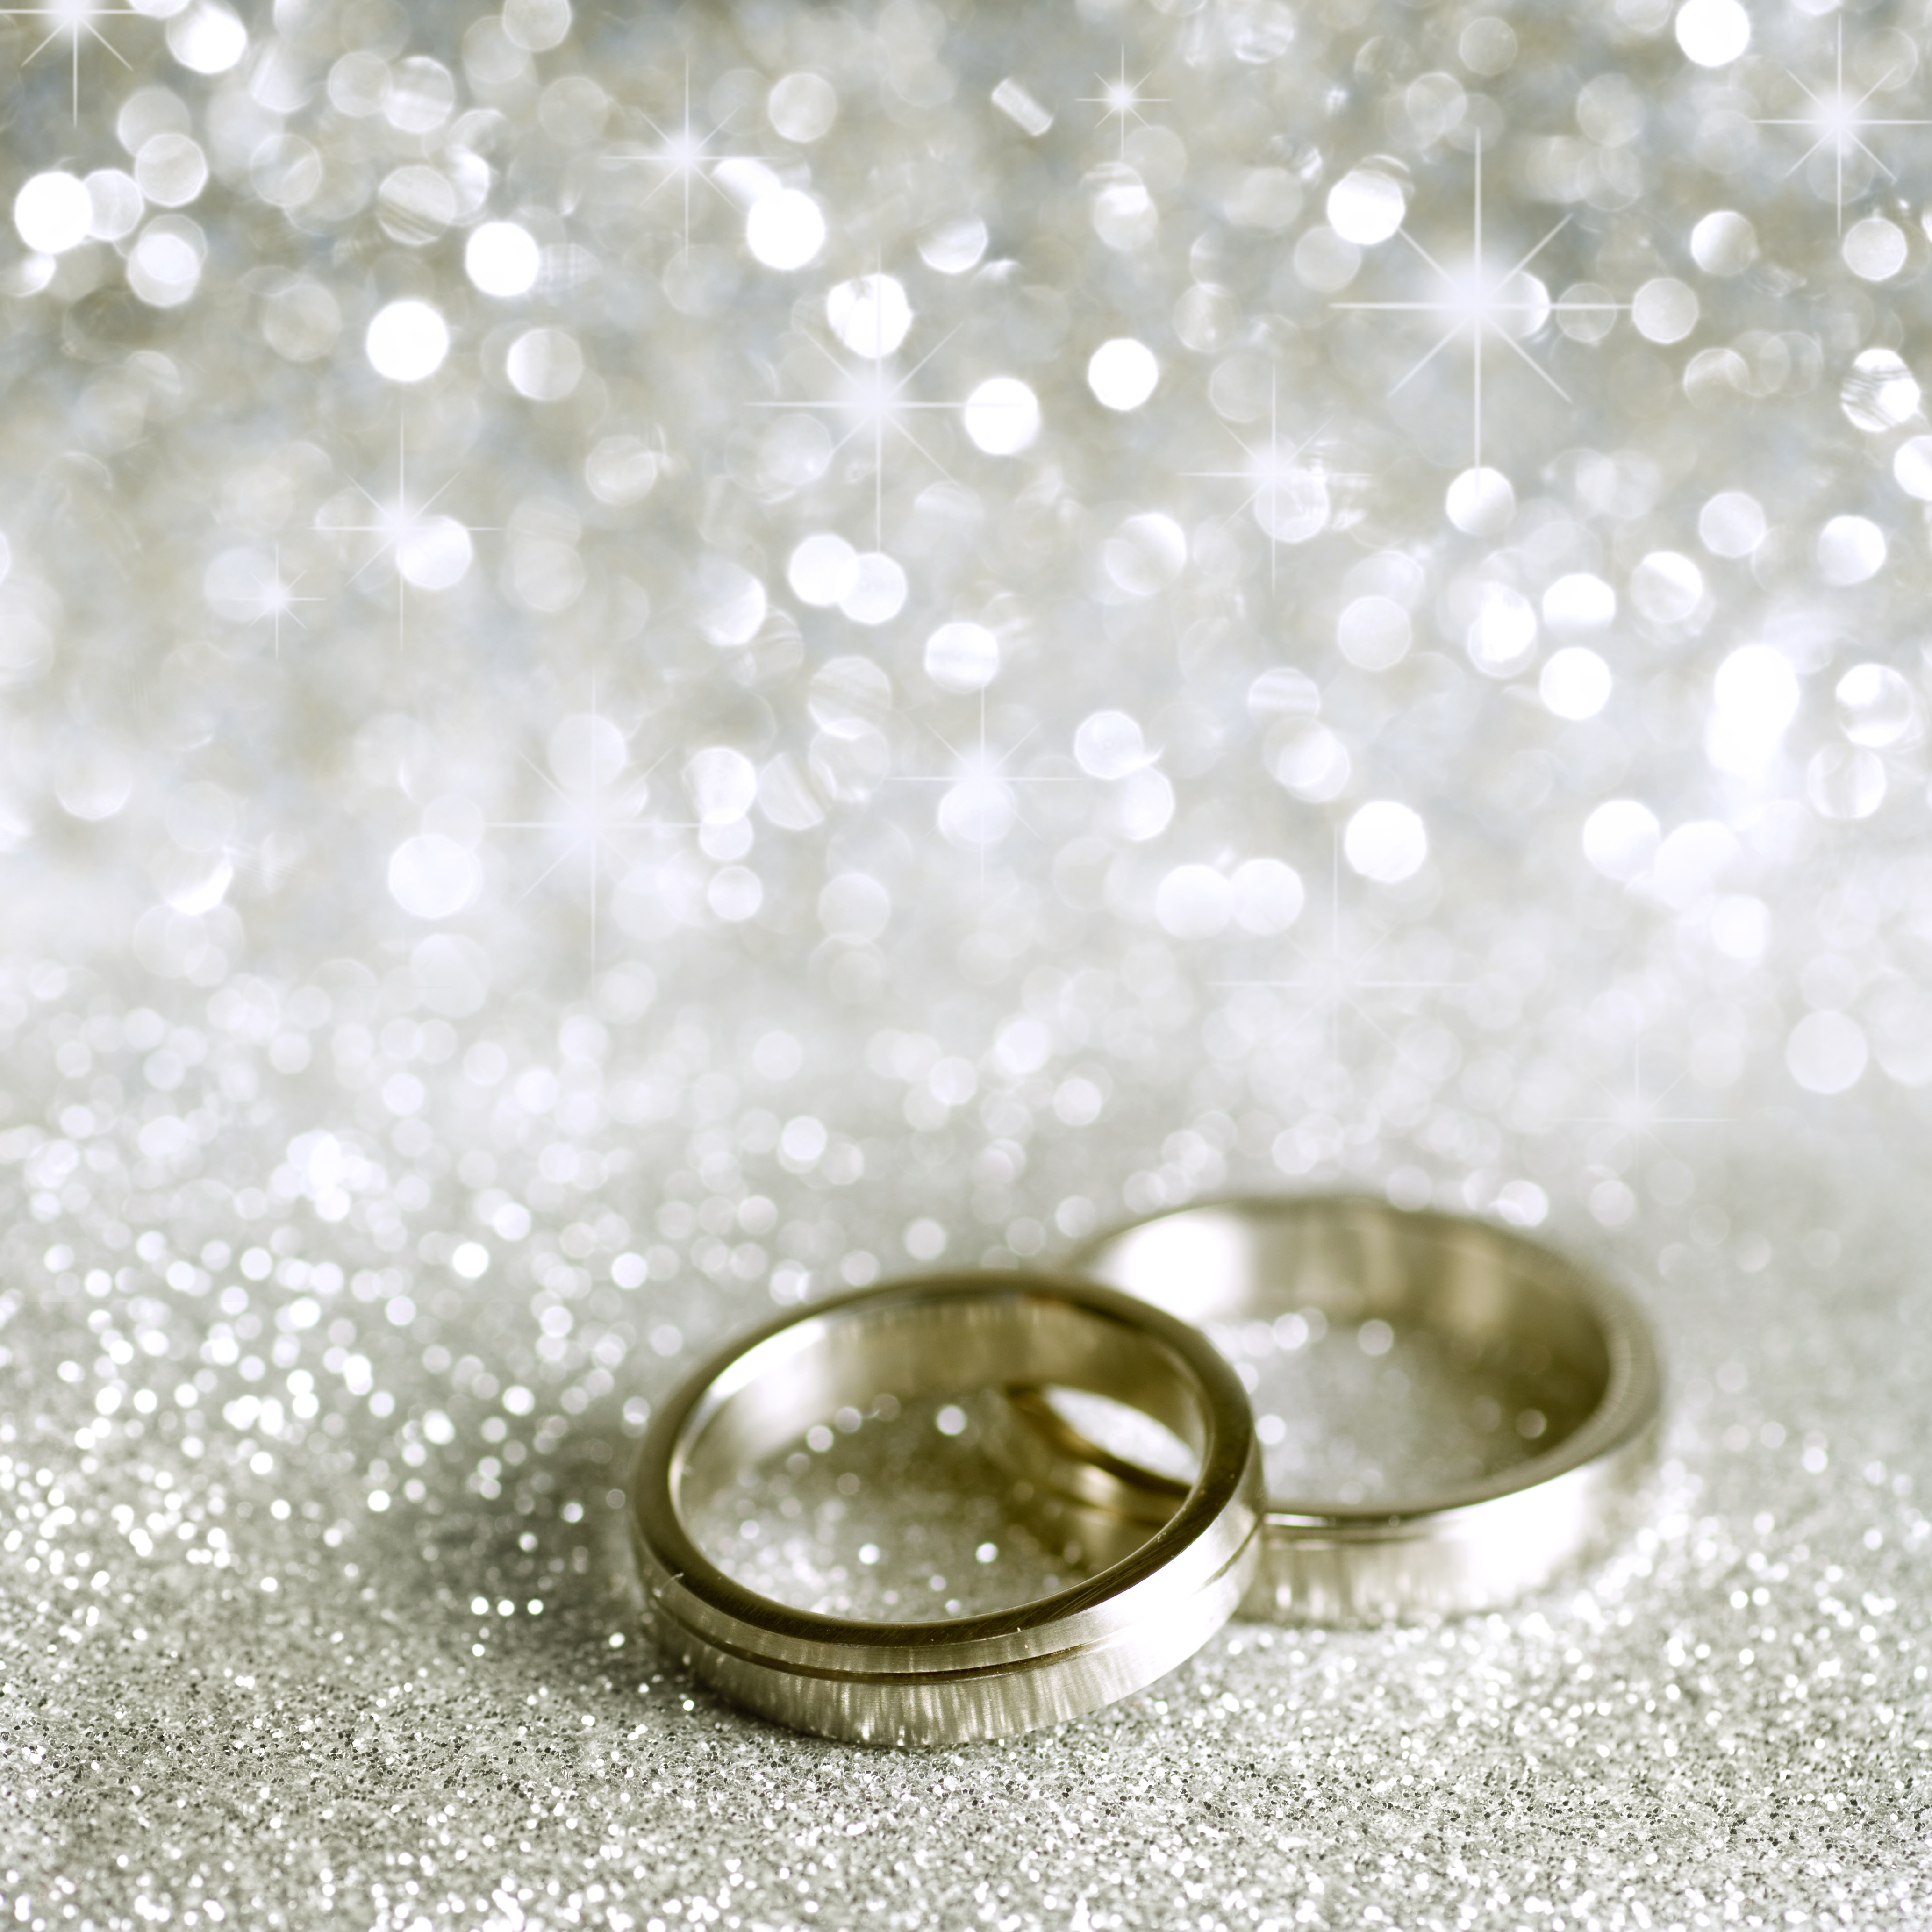 Gallery For Gt Wedding Ring Background